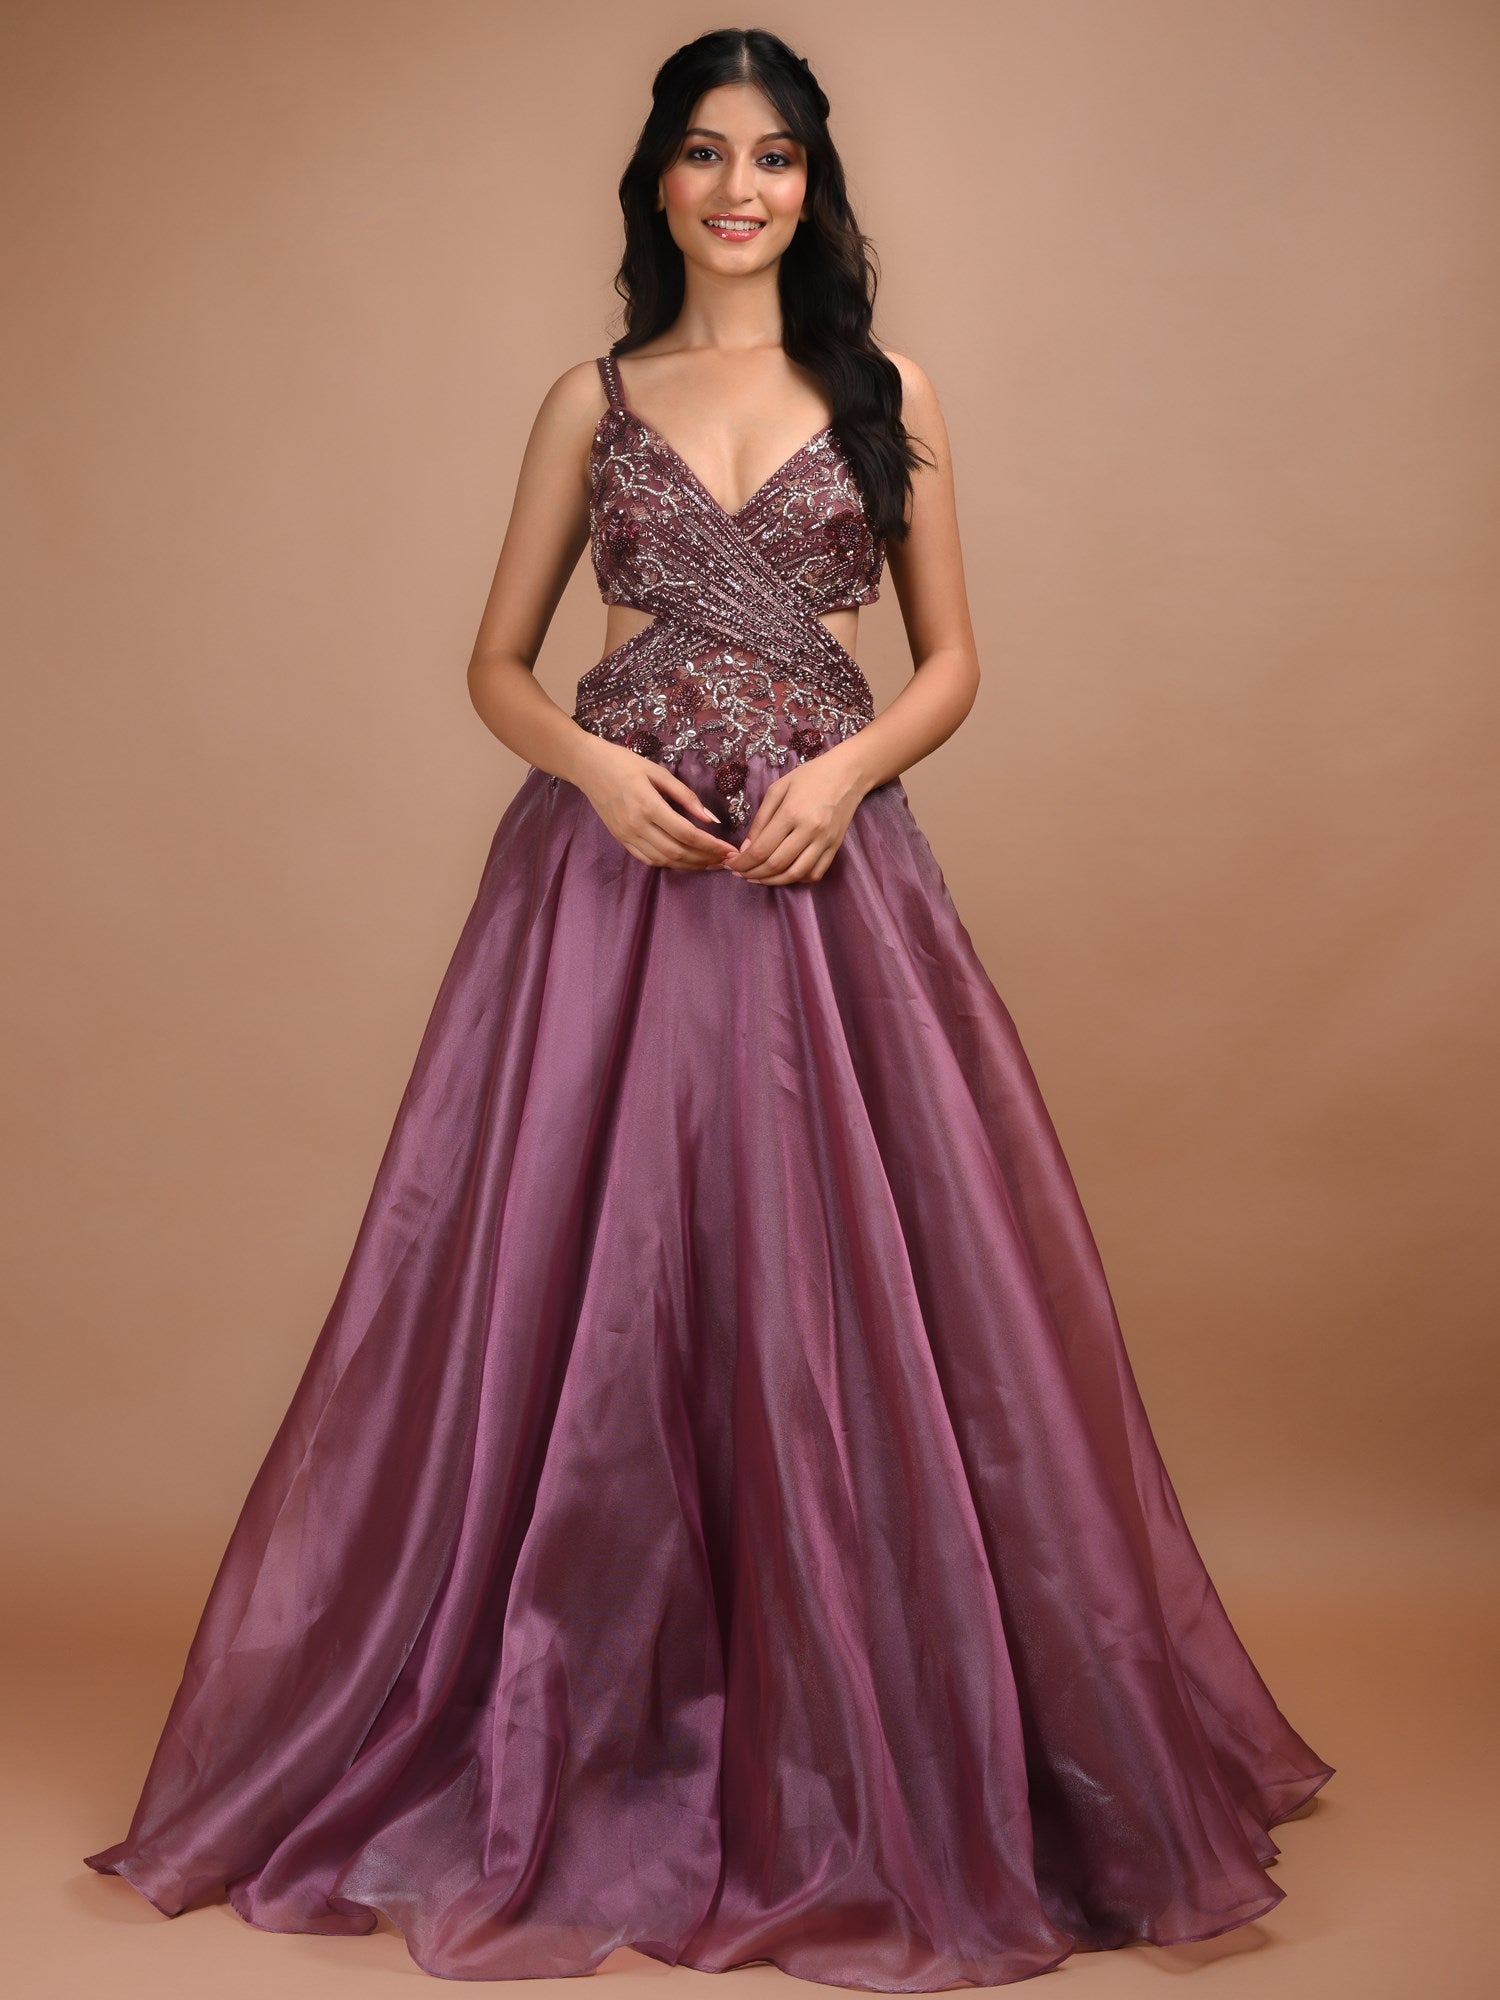 Compelling Firozi Engagement Designer Gown